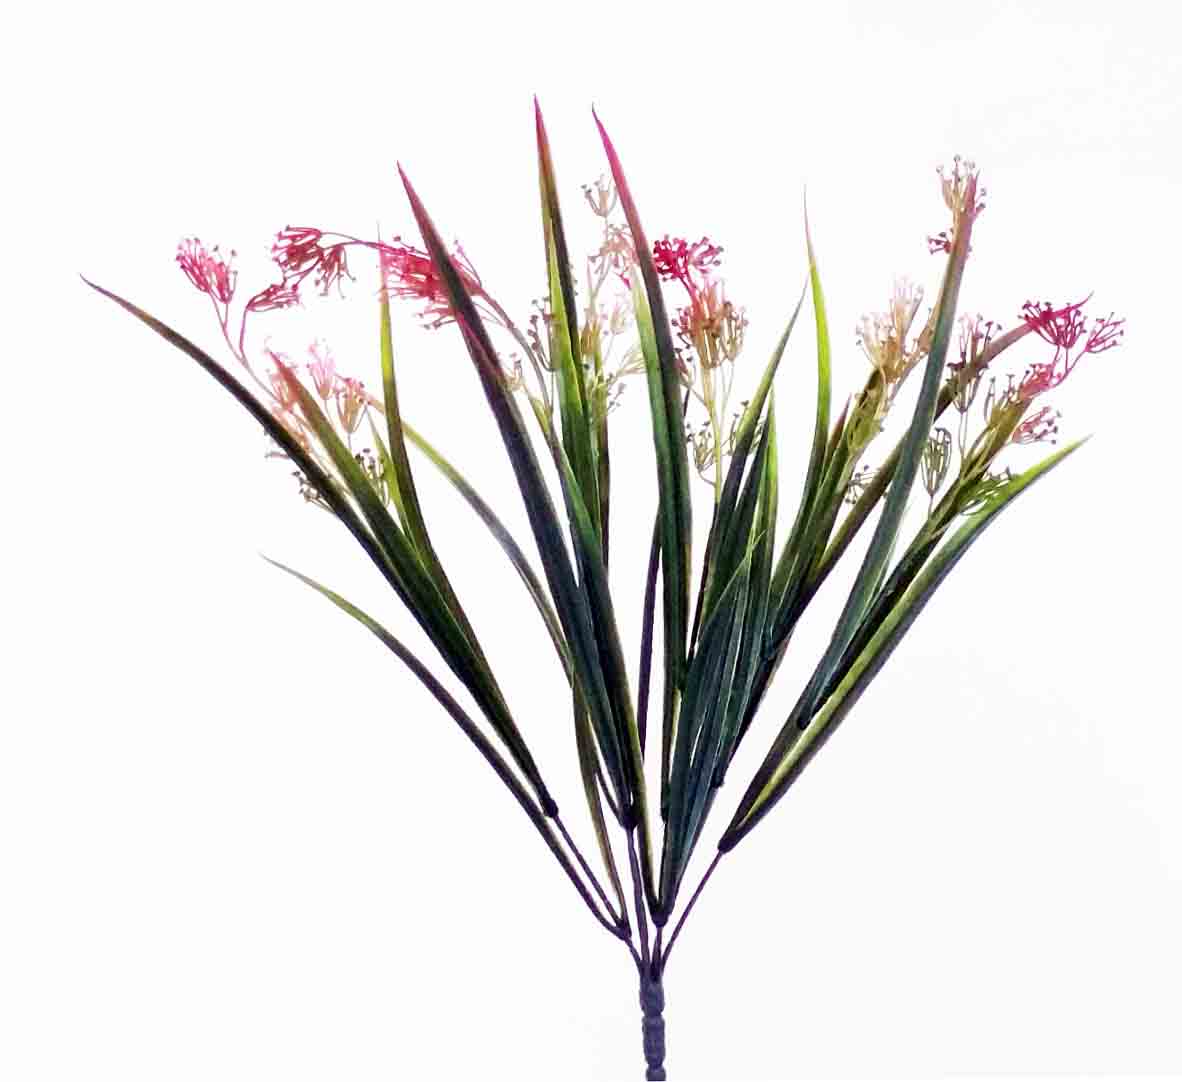 SG99 - 14" Grass with Pink Flowers - 4.10 ea, 3.89/36